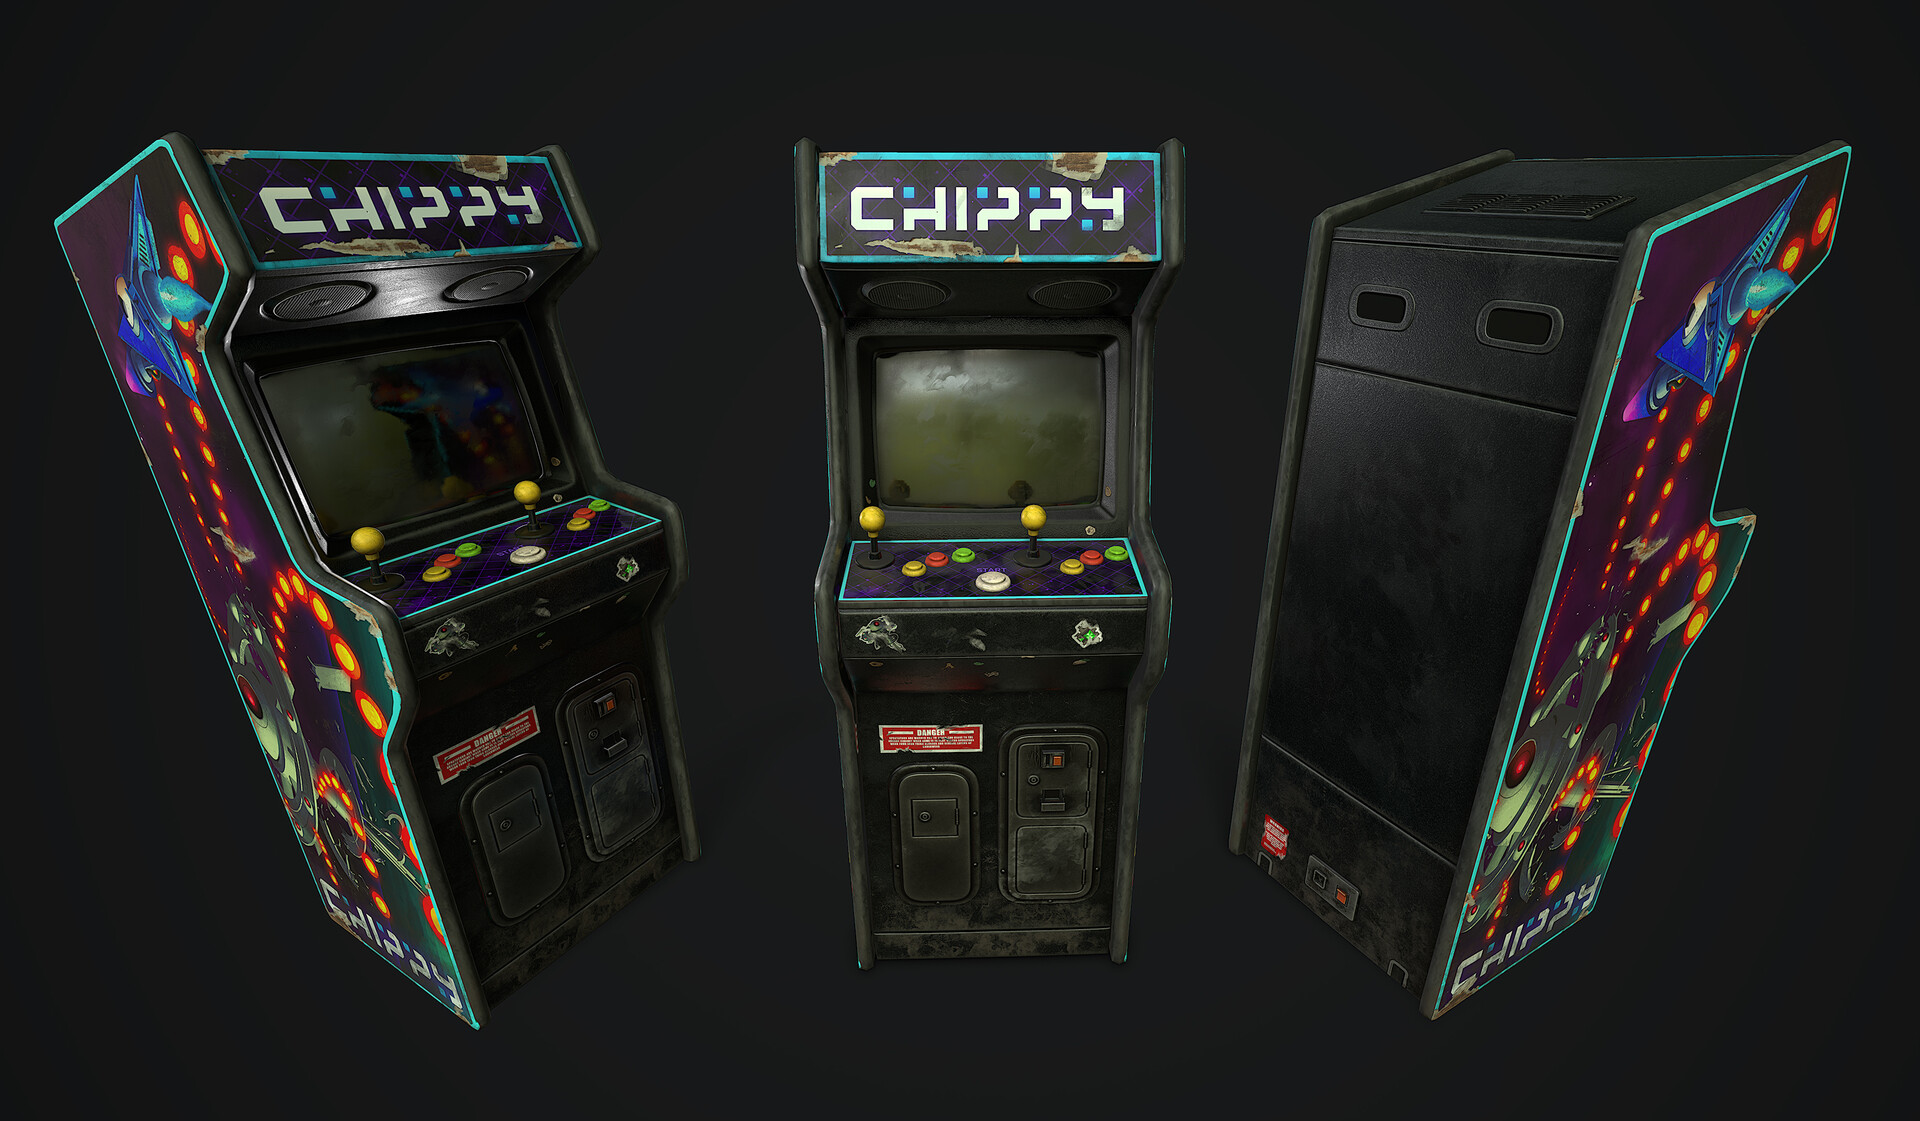 Rust Areade Bed Wars I Among RustArcade13.0.6 - - 198ms Rust Arcade Mini  Games Server The only